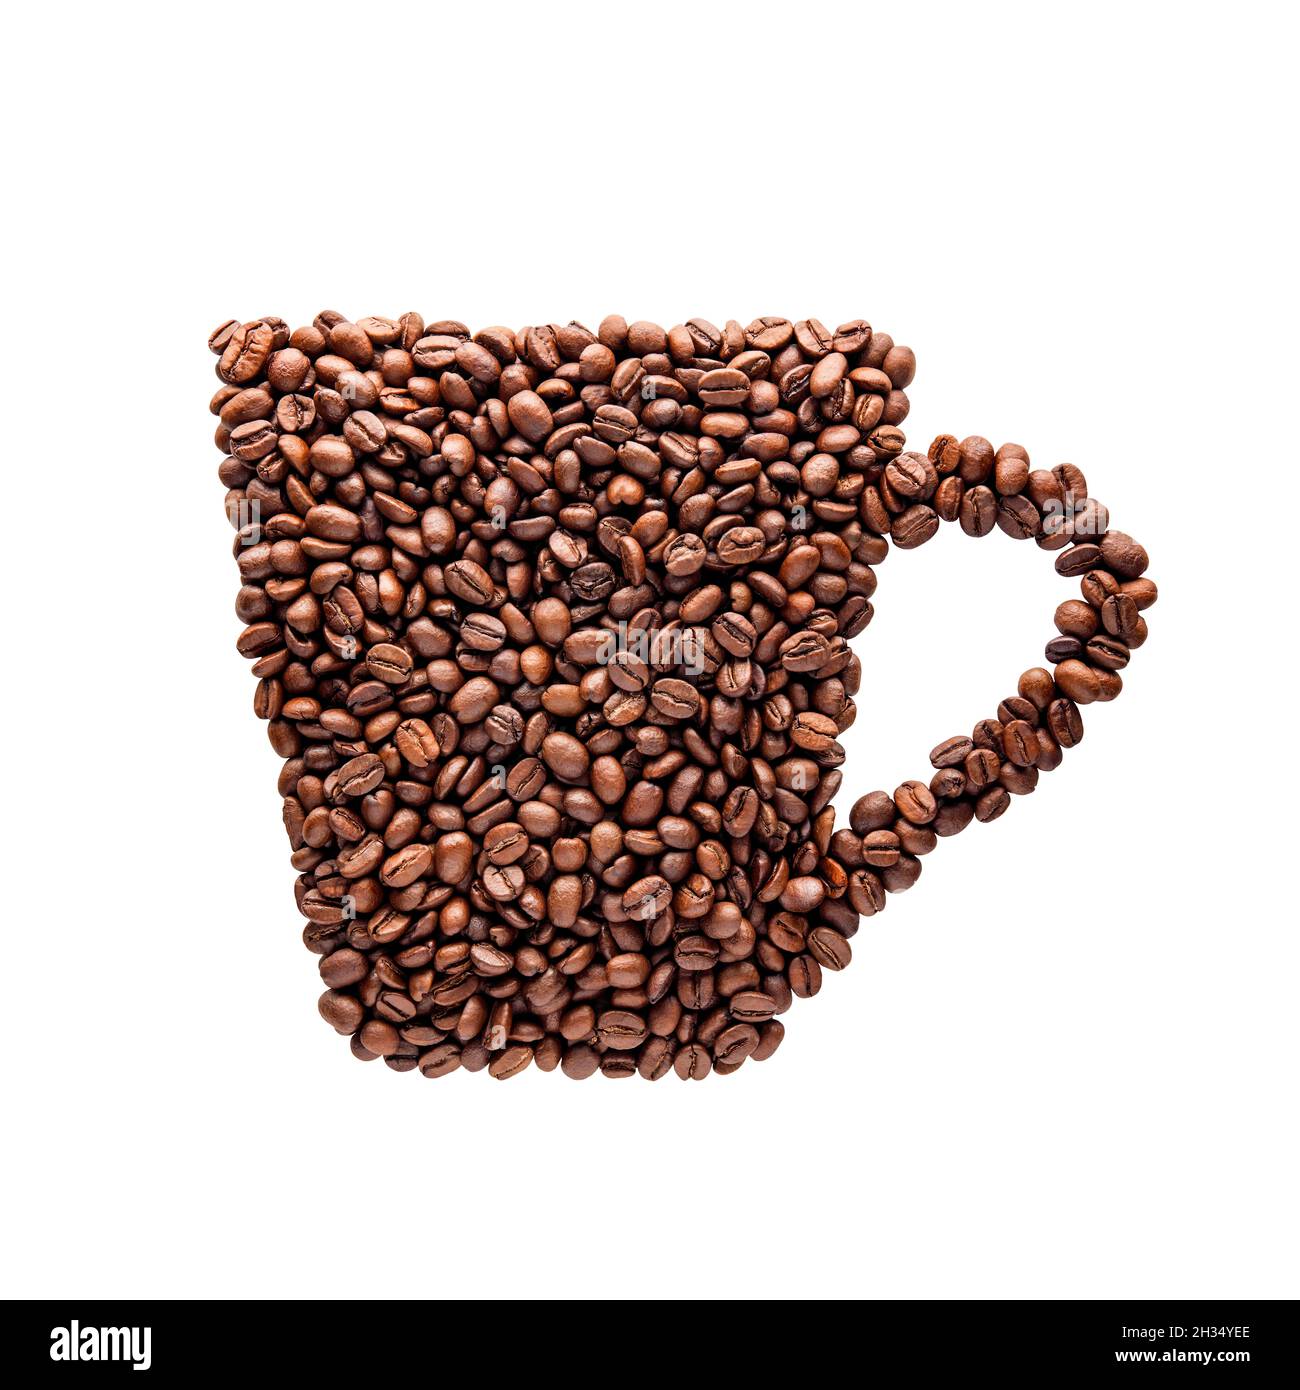 Coffee cup shape by beans Stock Photo